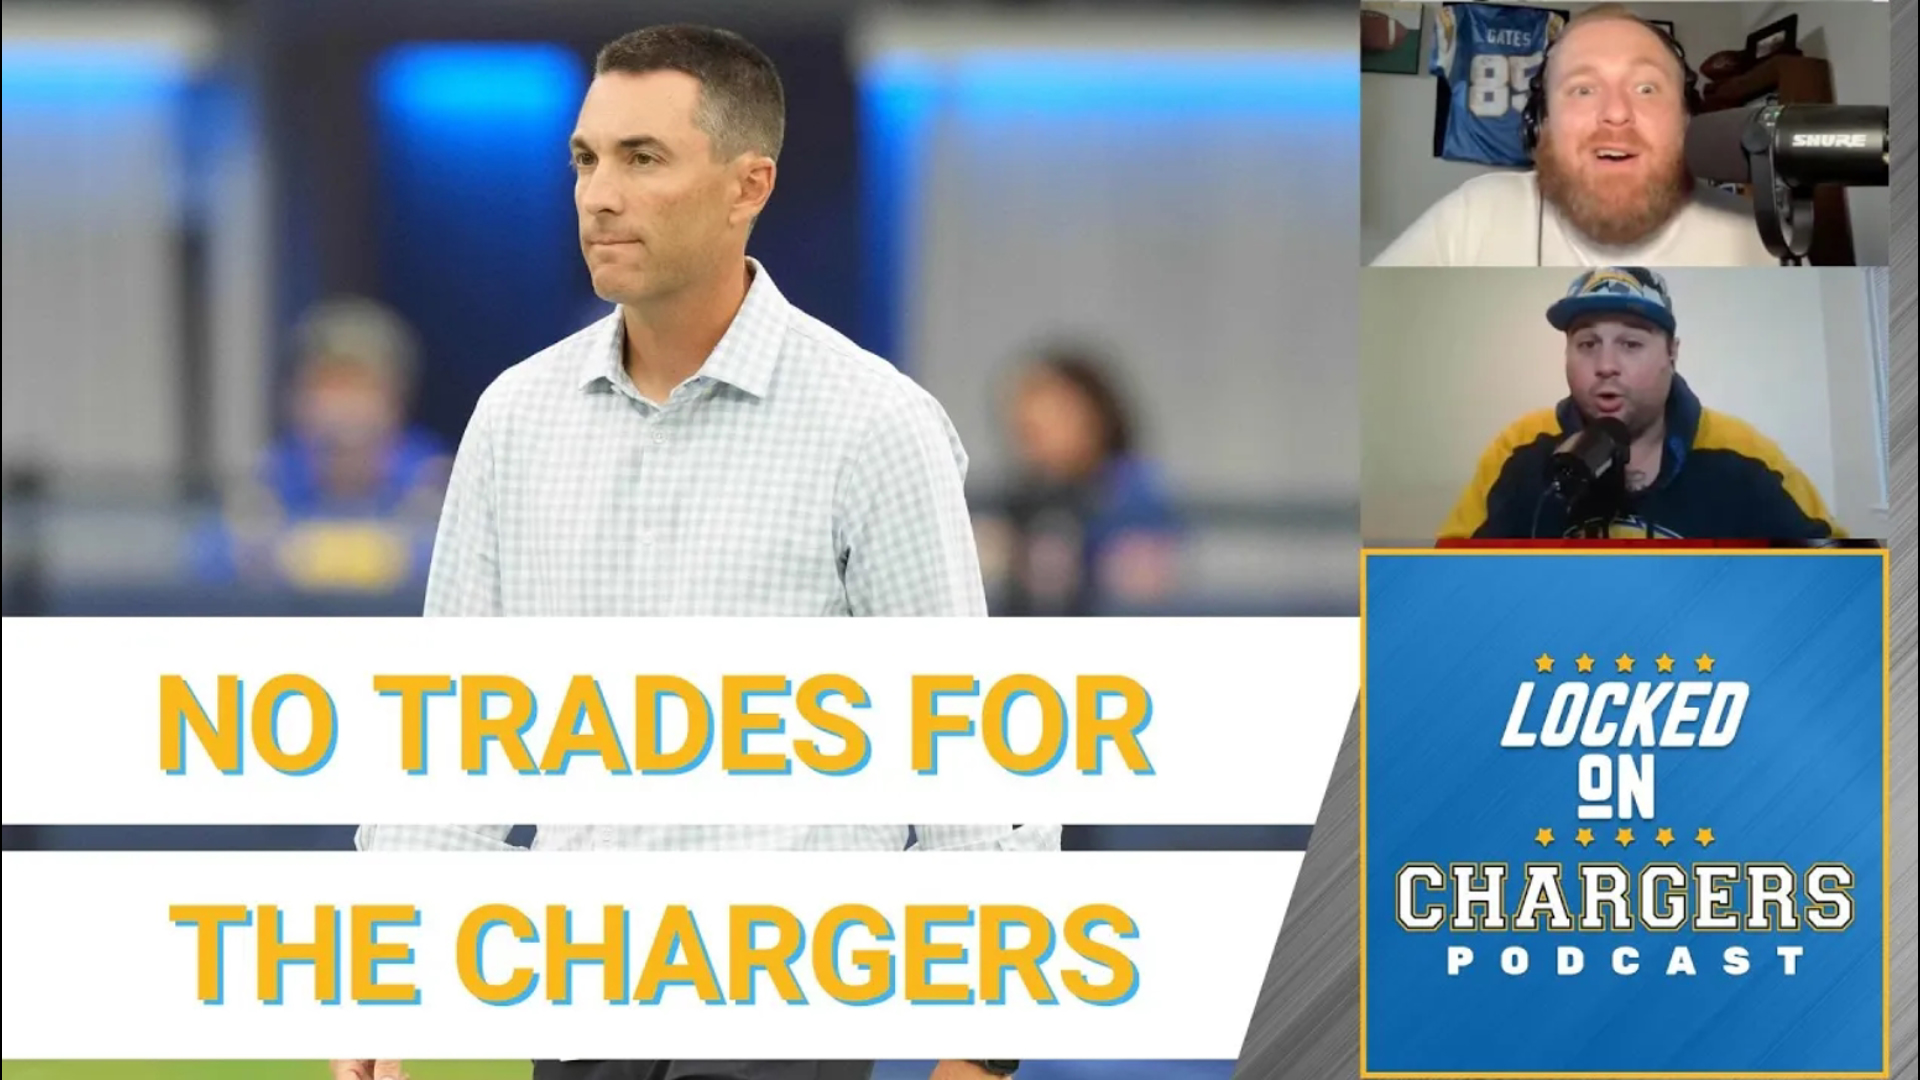 The guys discuss why they believe the Chargers  should have made a move after injuries to several stars and why they may end up regretting it.